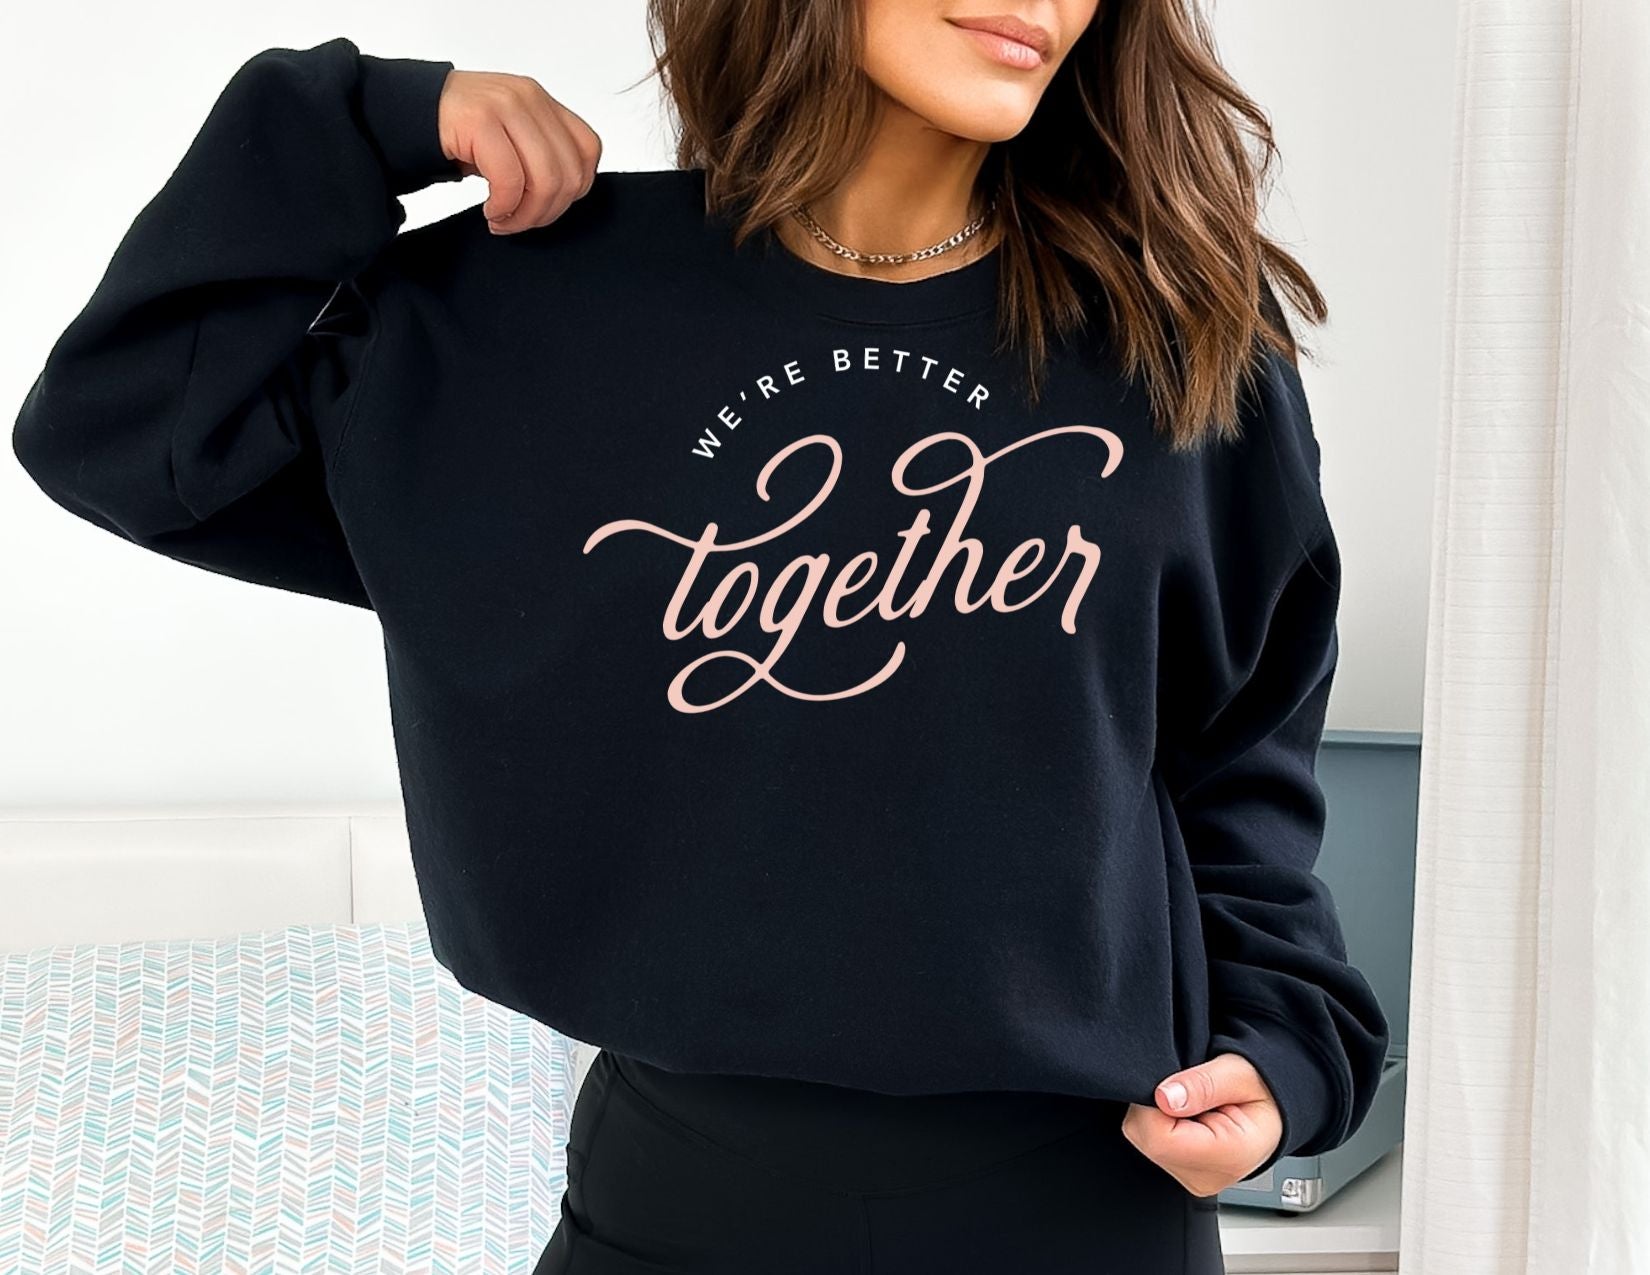 Better Together Sweatshirt in black for girls trip travel day outfit